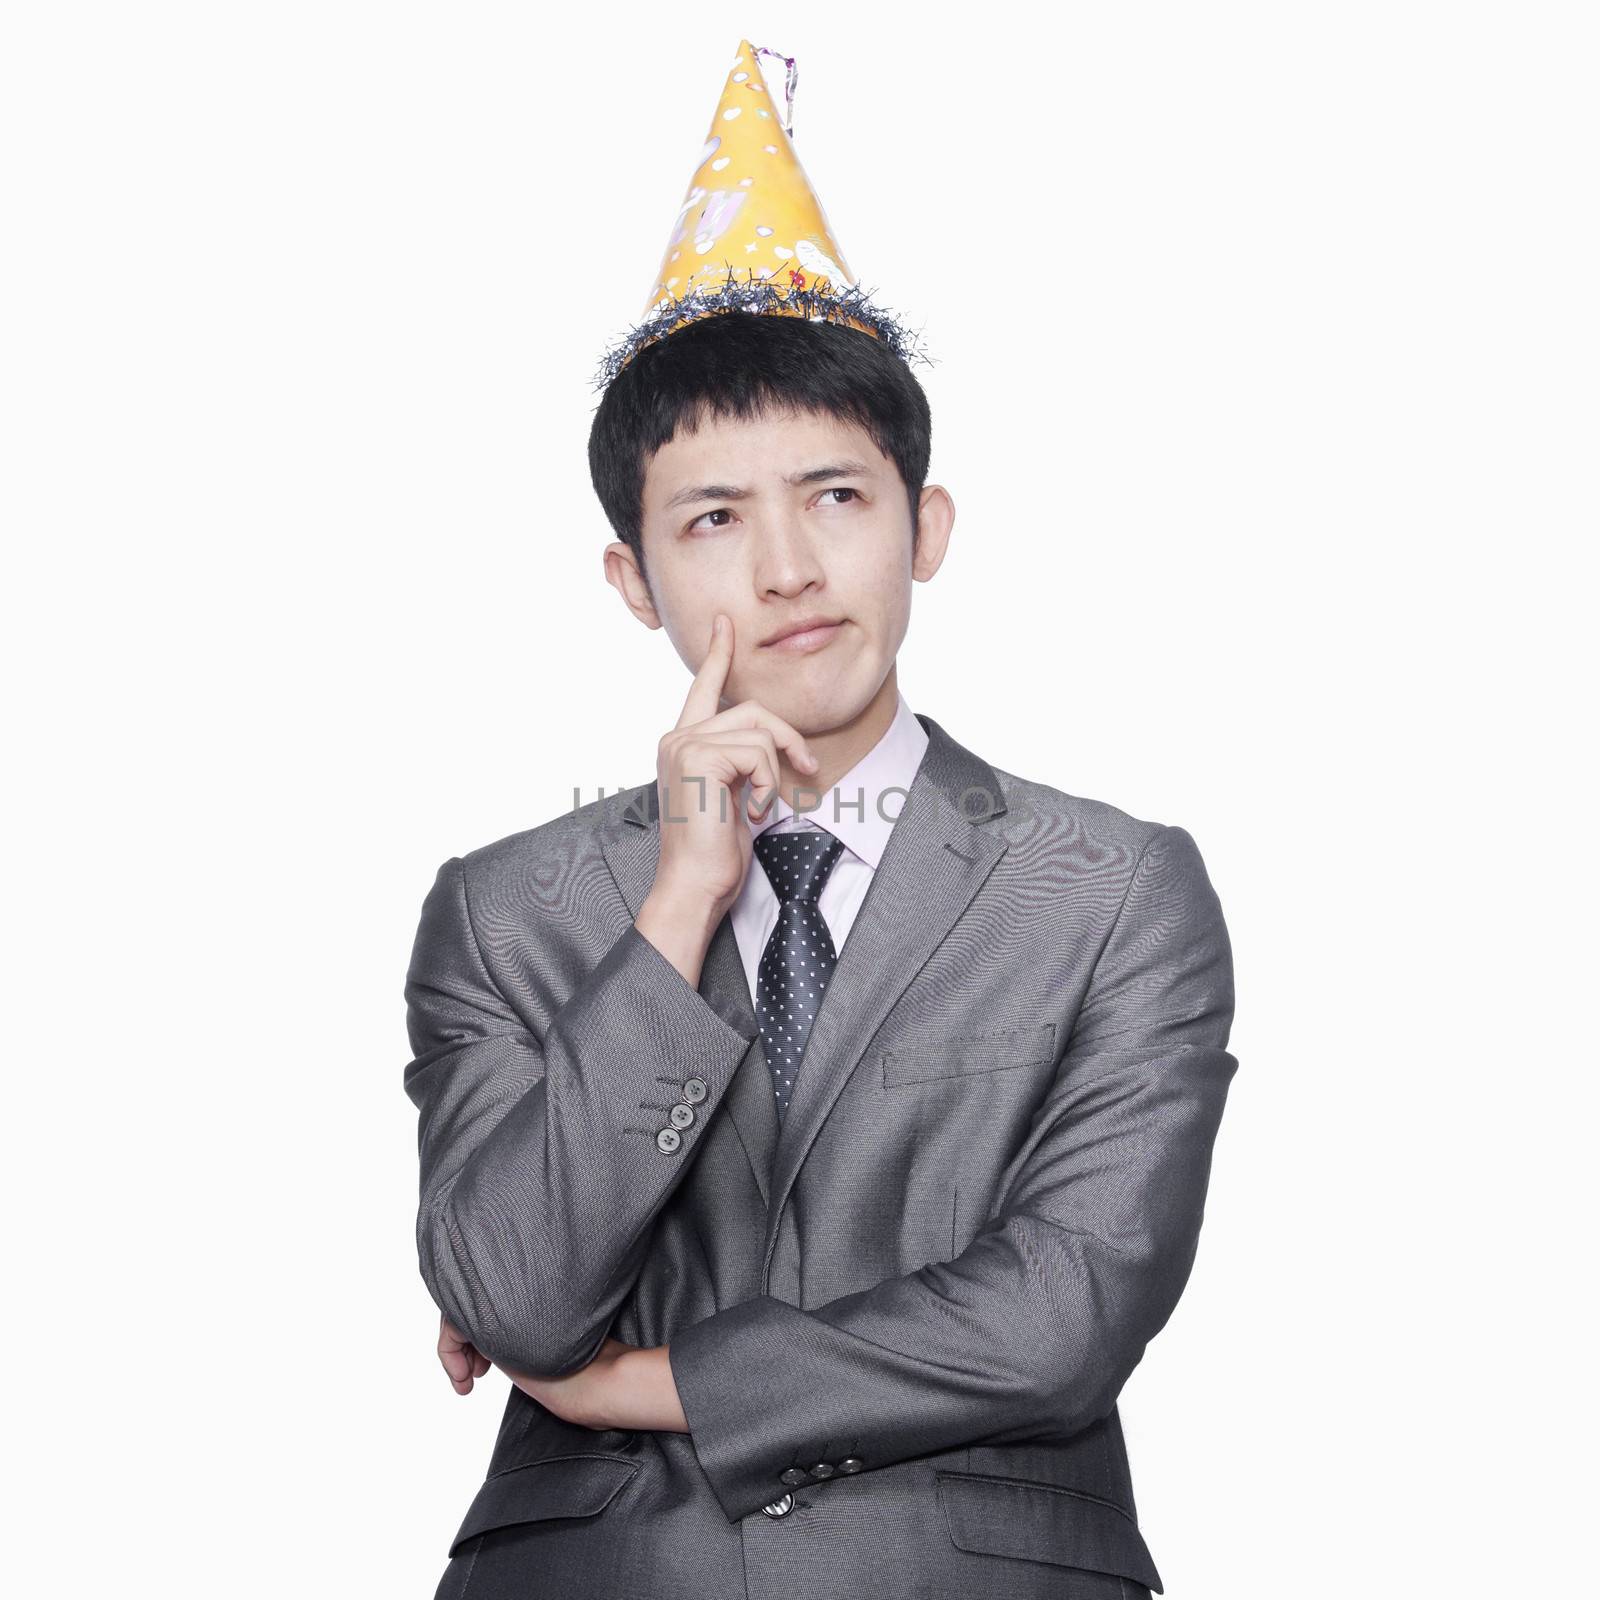 Businessman thinking, wearing party hat by XiXinXing